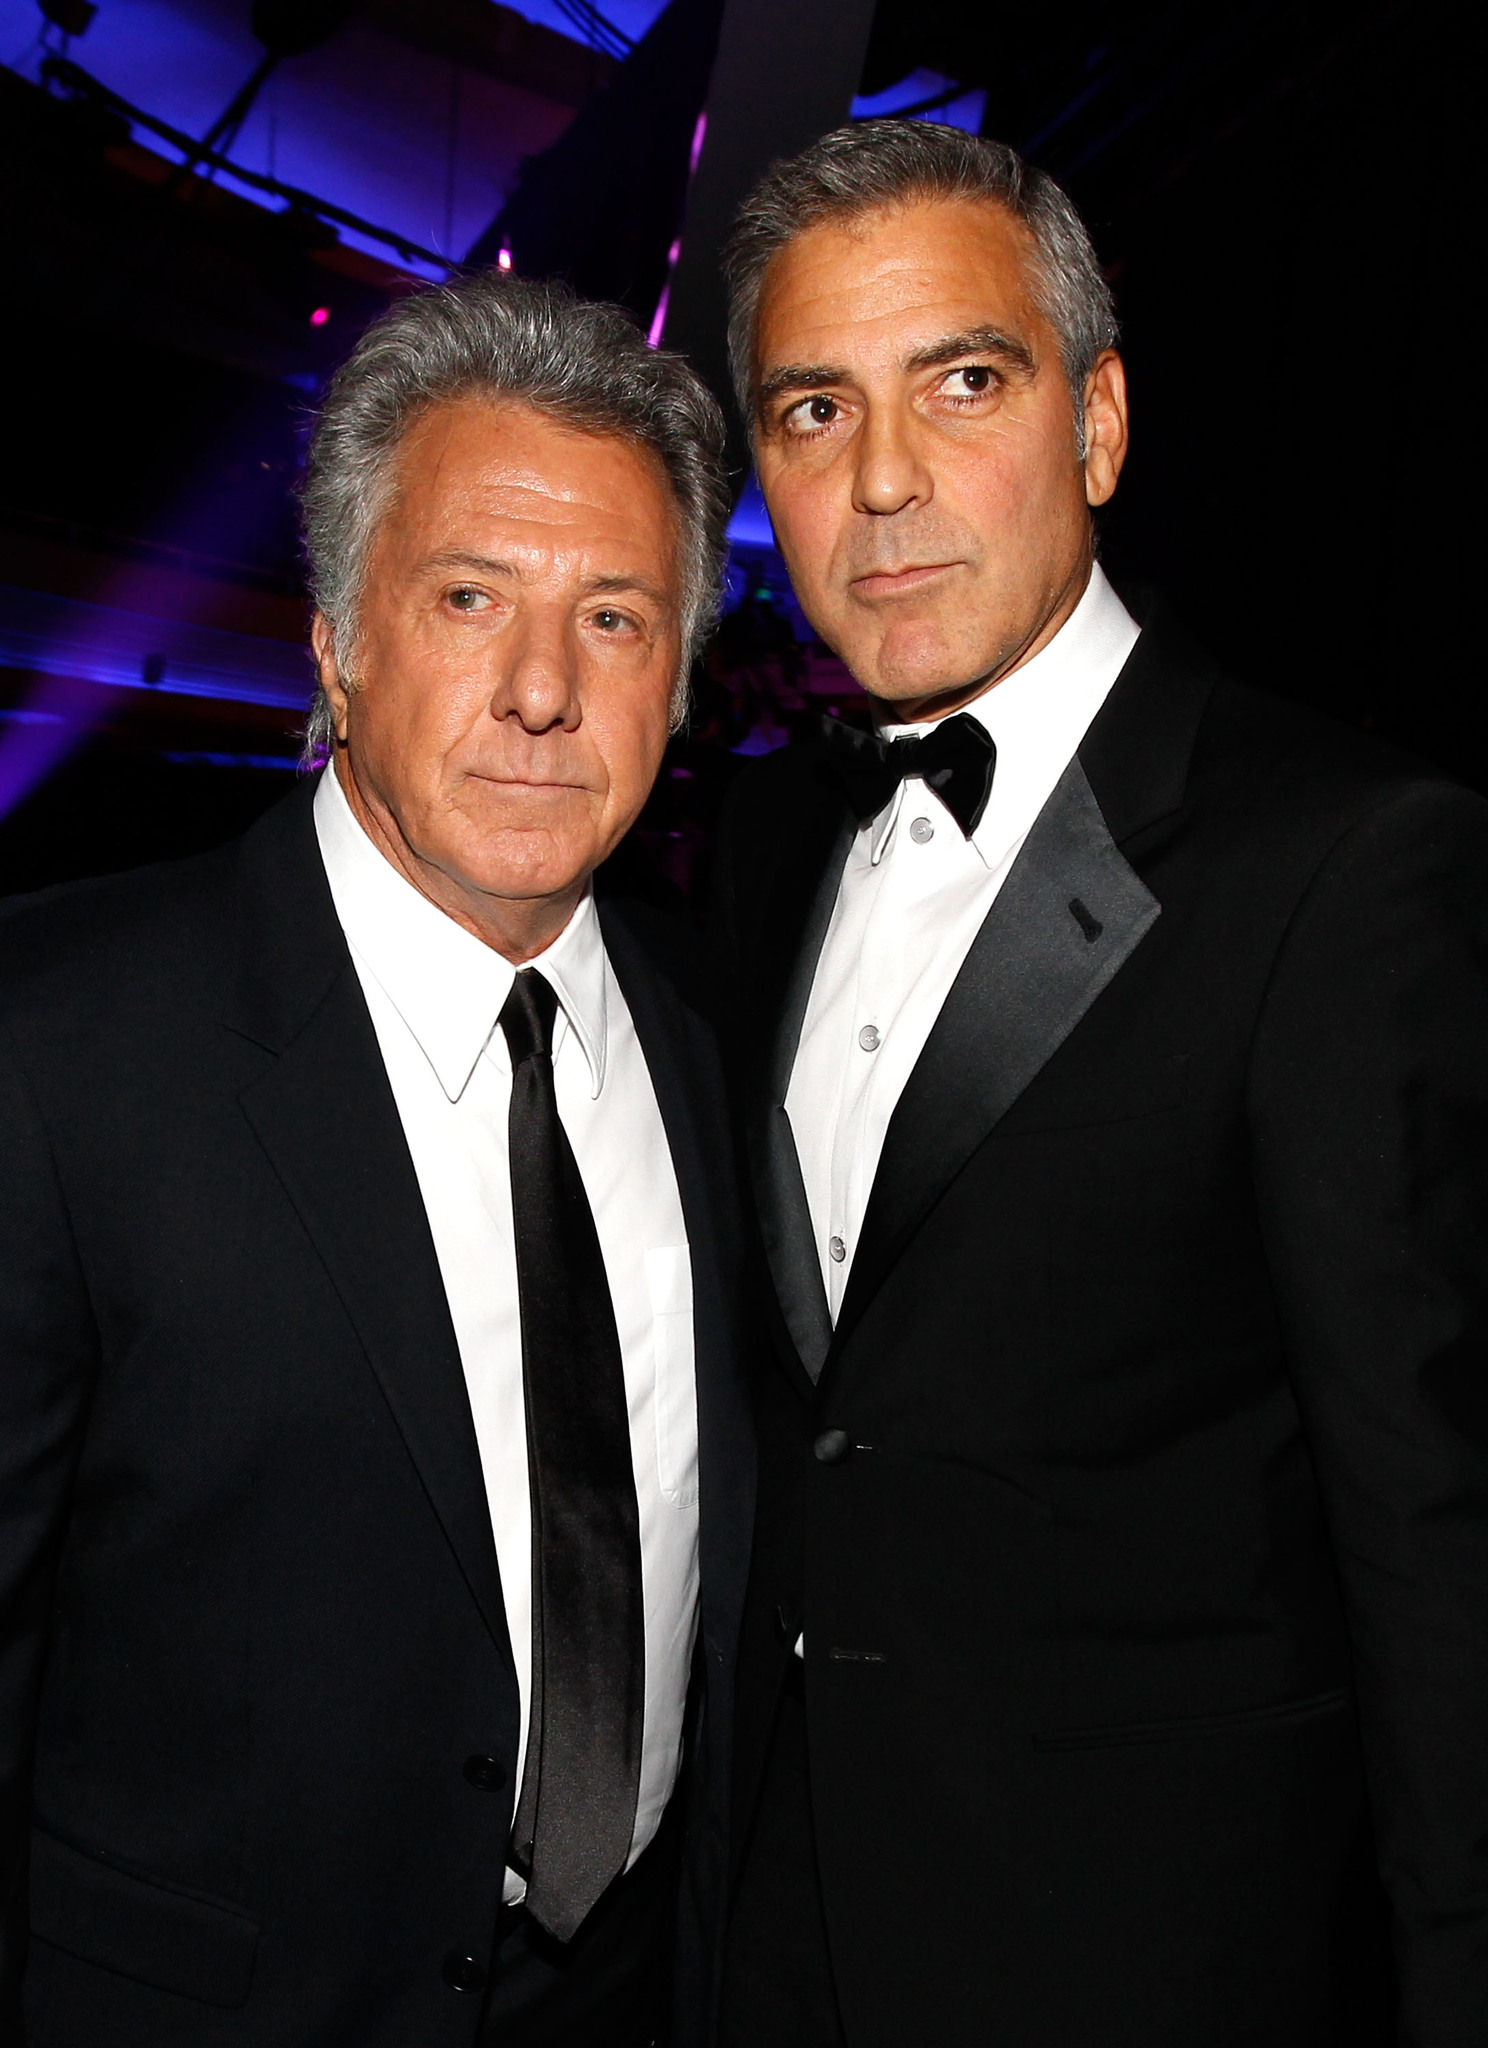 George Clooney and Dustin Hoffman